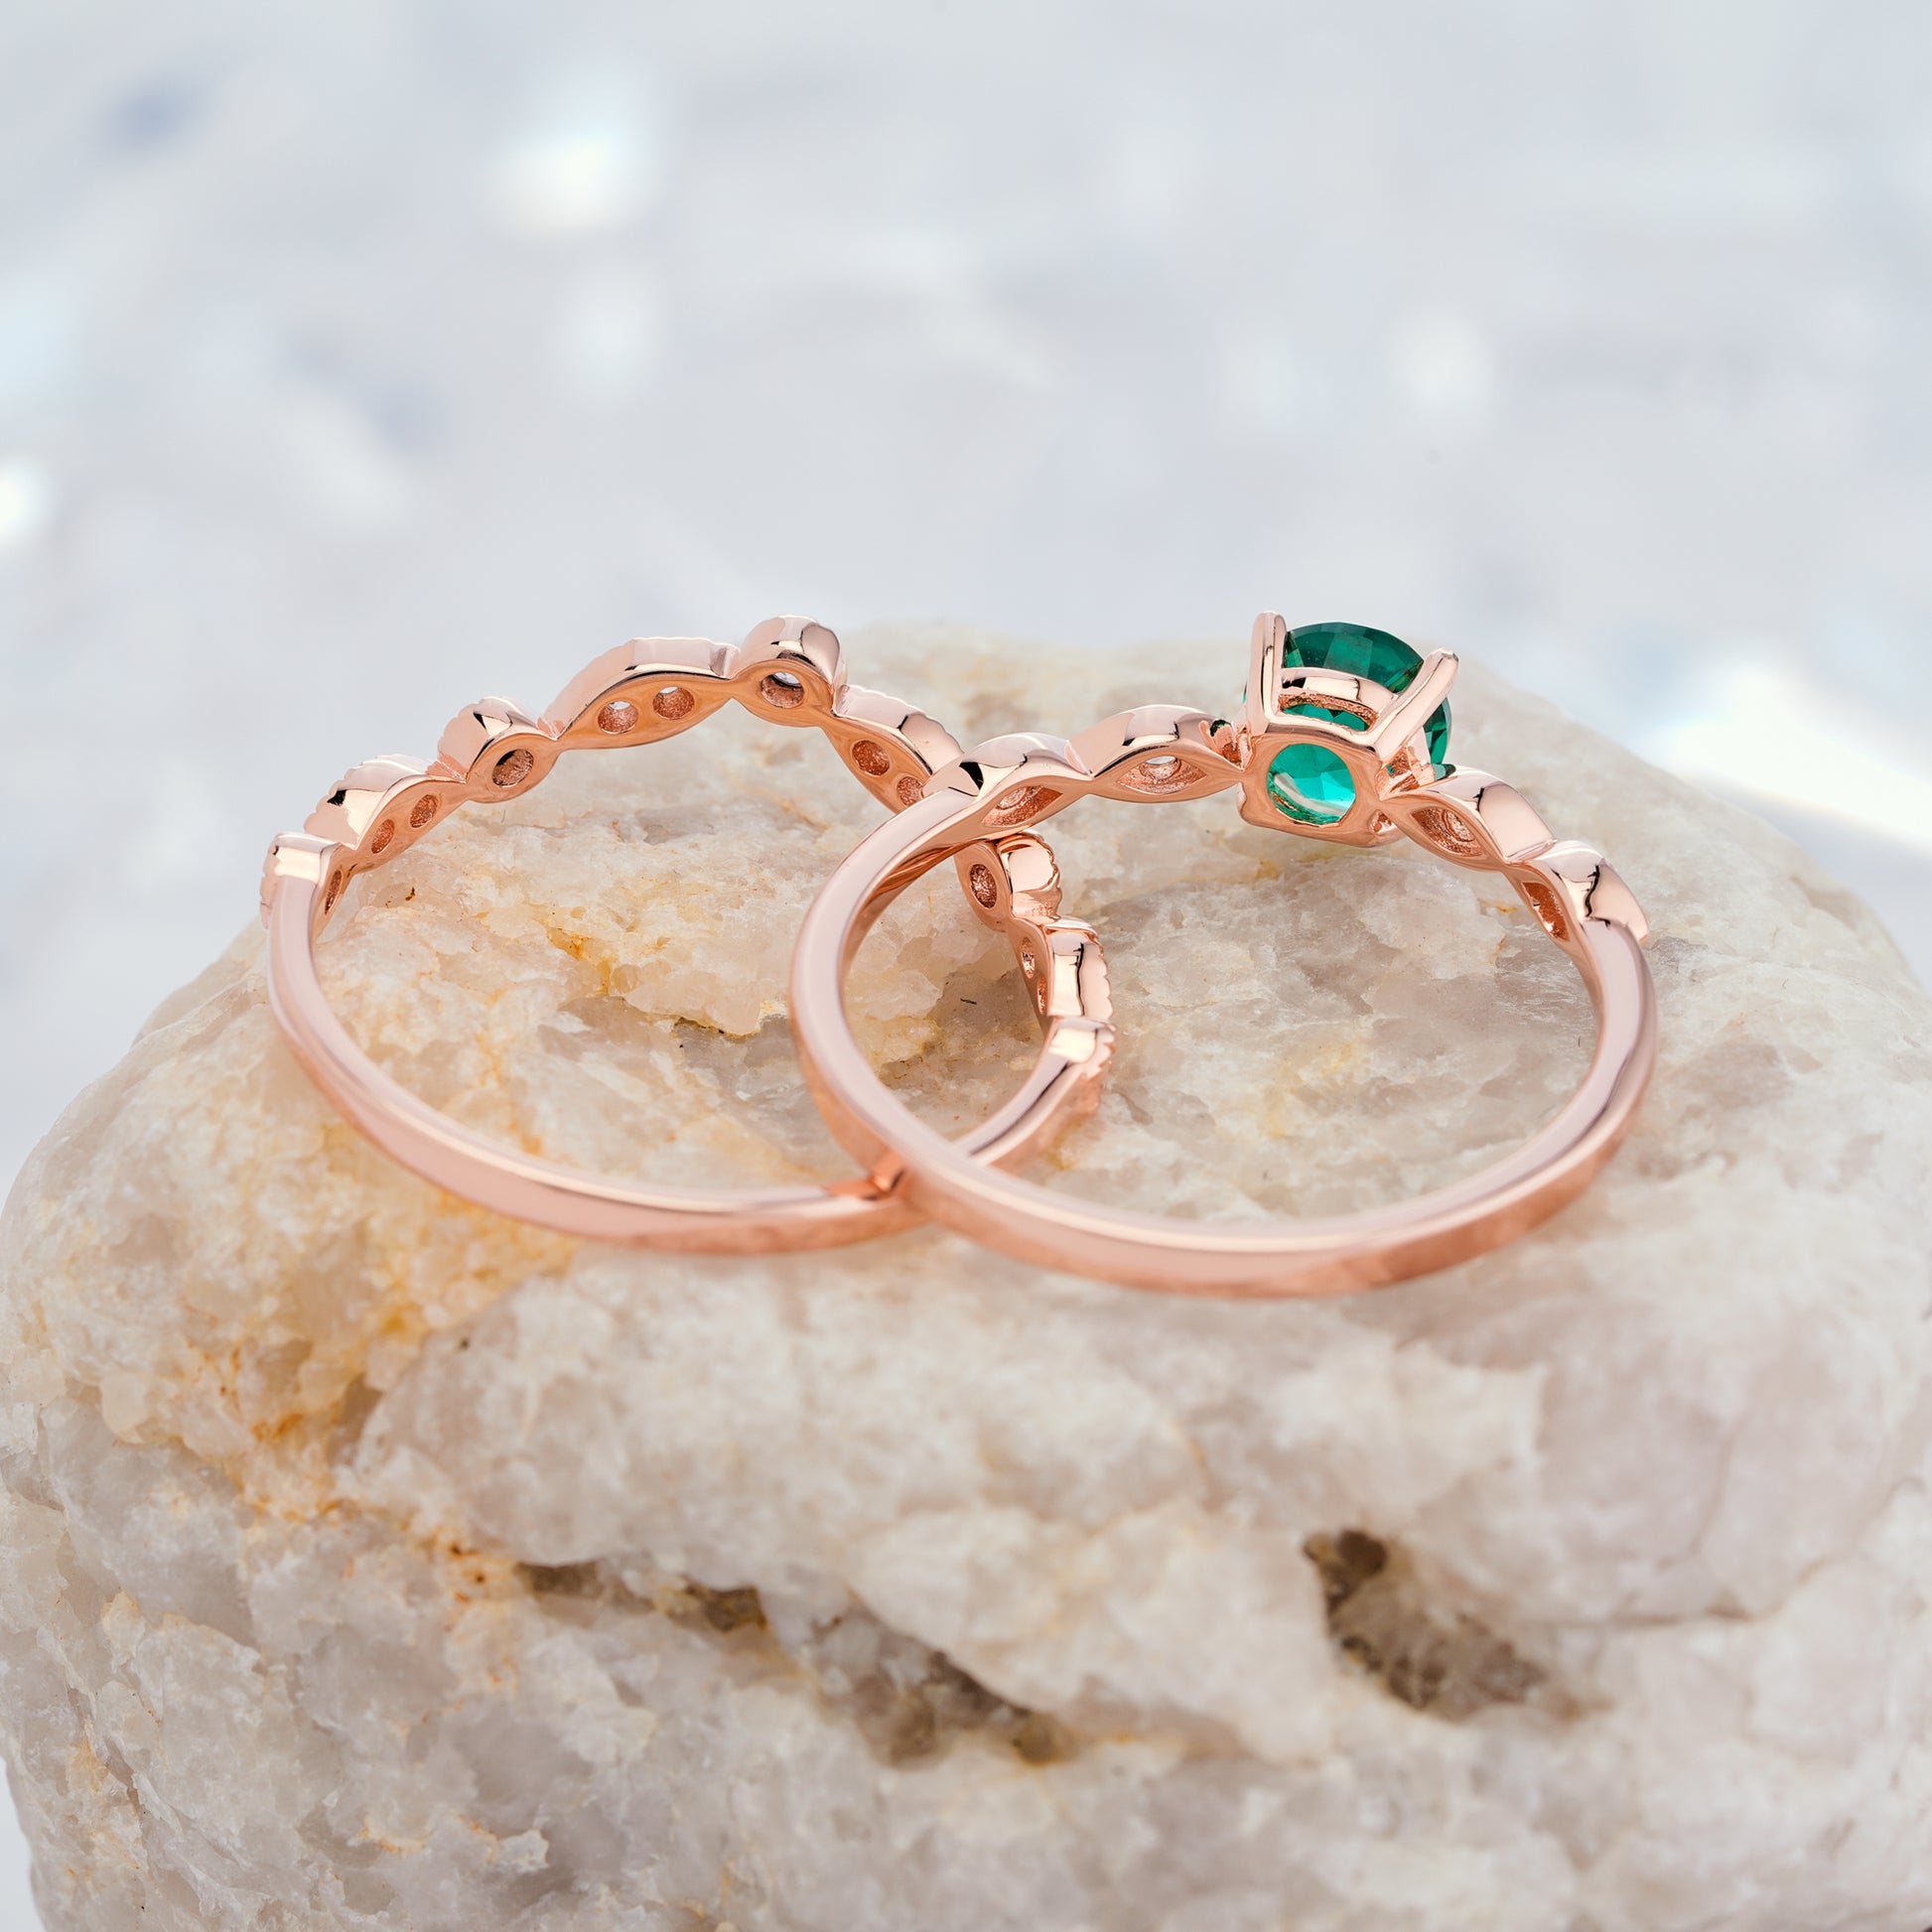 Emerald Engagement Ring Set in14K/18K Gold - ShainJewelry